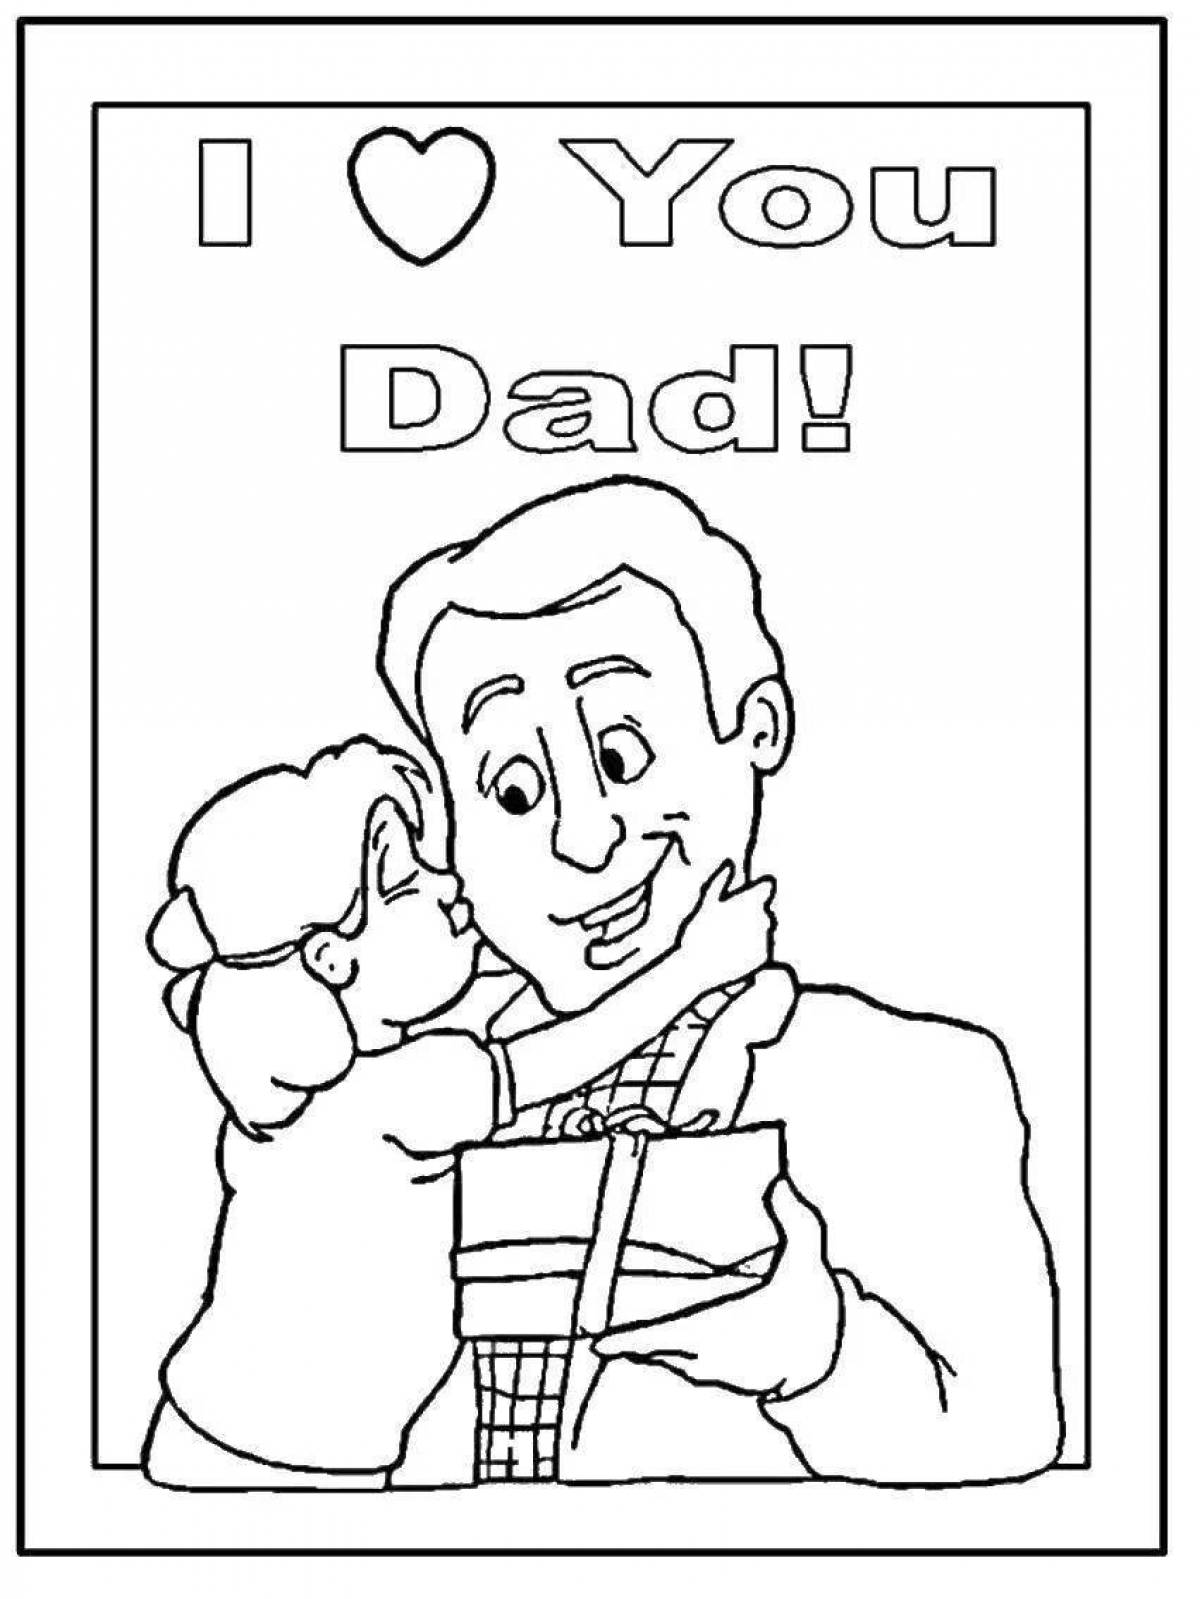 Glorious i love you daddy coloring page